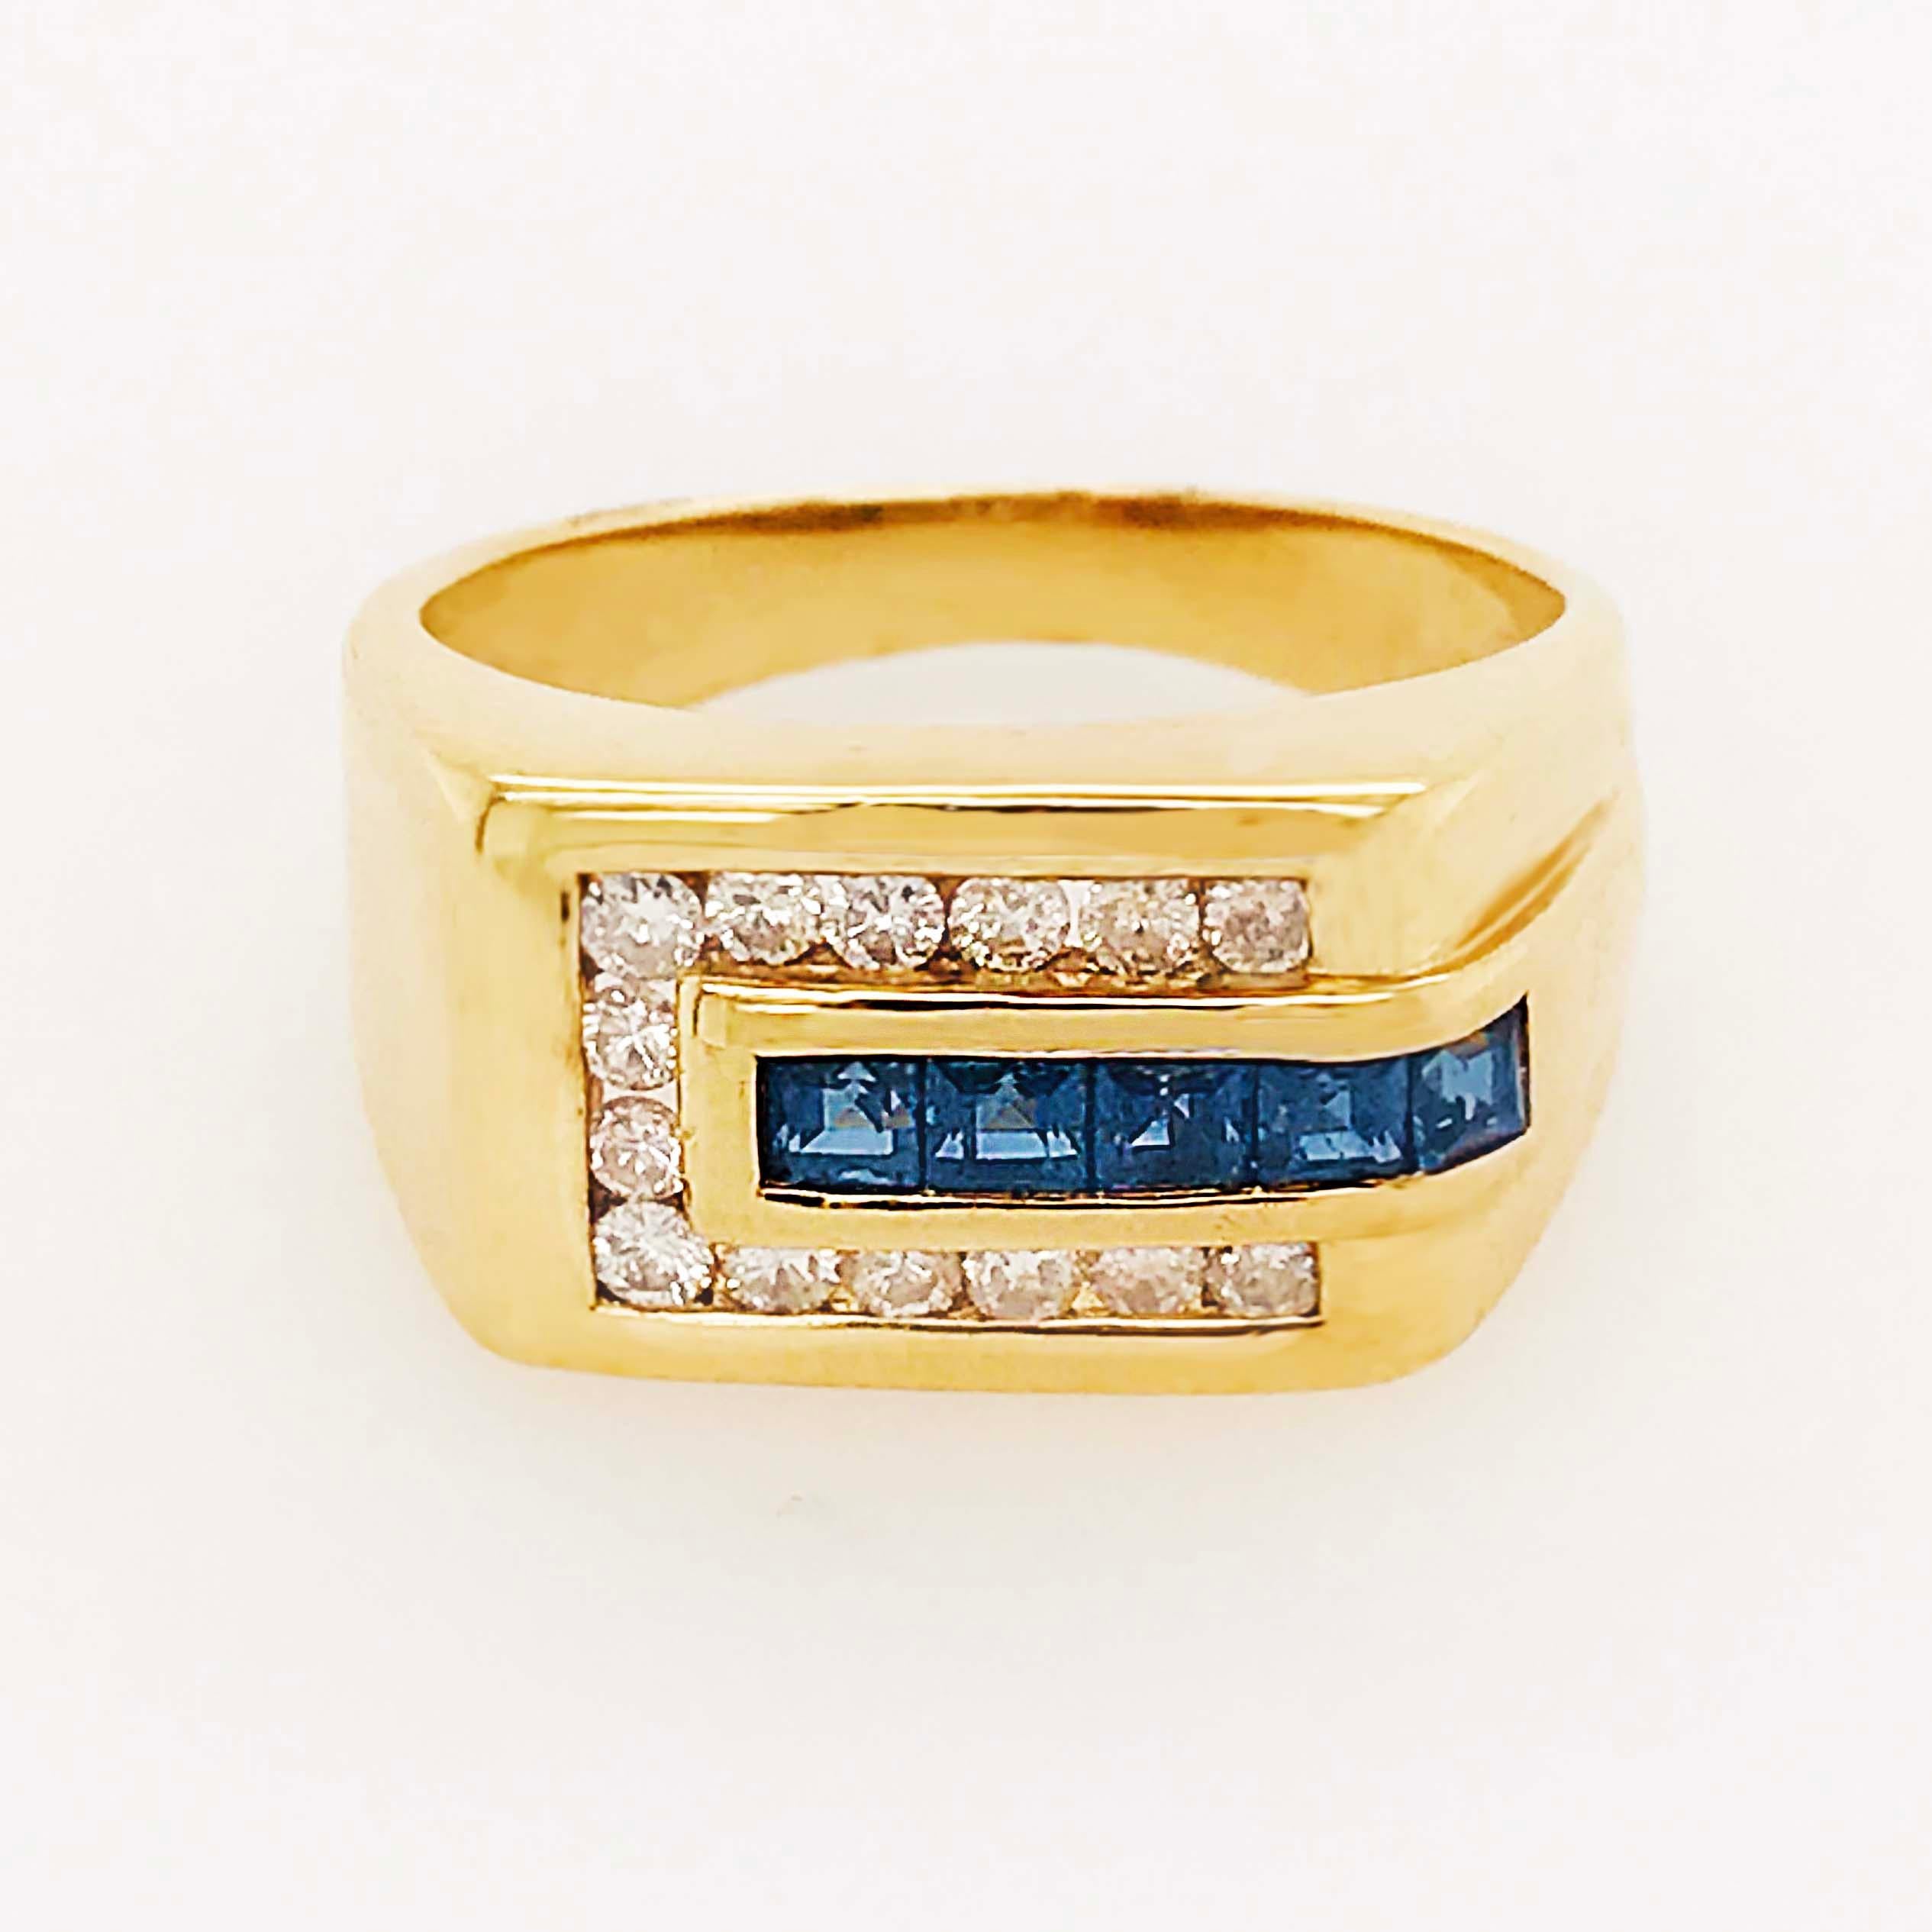 The 18 karat yellow gold sapphire and diamond ring is rectangle shape and very striking!  This ring looks great on a man’s ring finger or pinky finger or on the middle or pointer finger of a lady.  The diamonds and gemstones are channel set so that